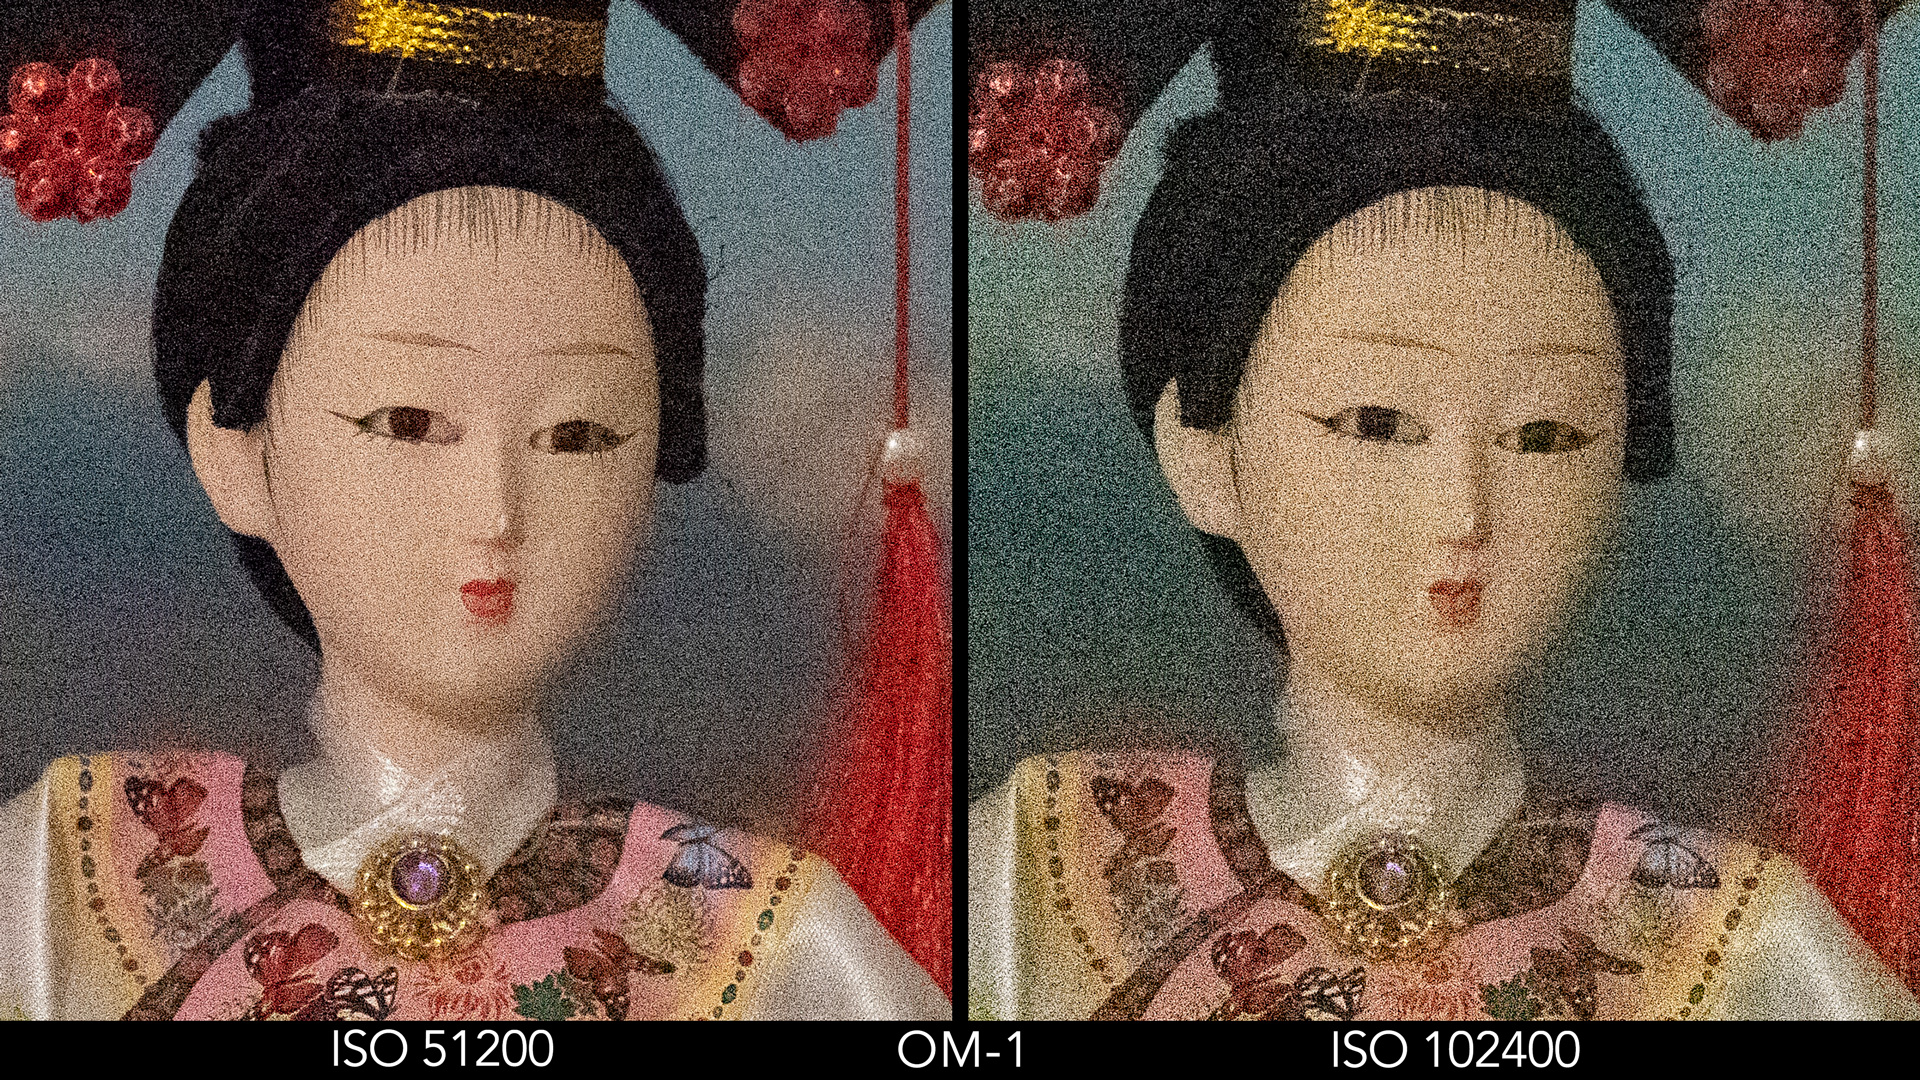 side by side image of a Japanese doll comparing ISO 51200 and 102400 on the OM-1